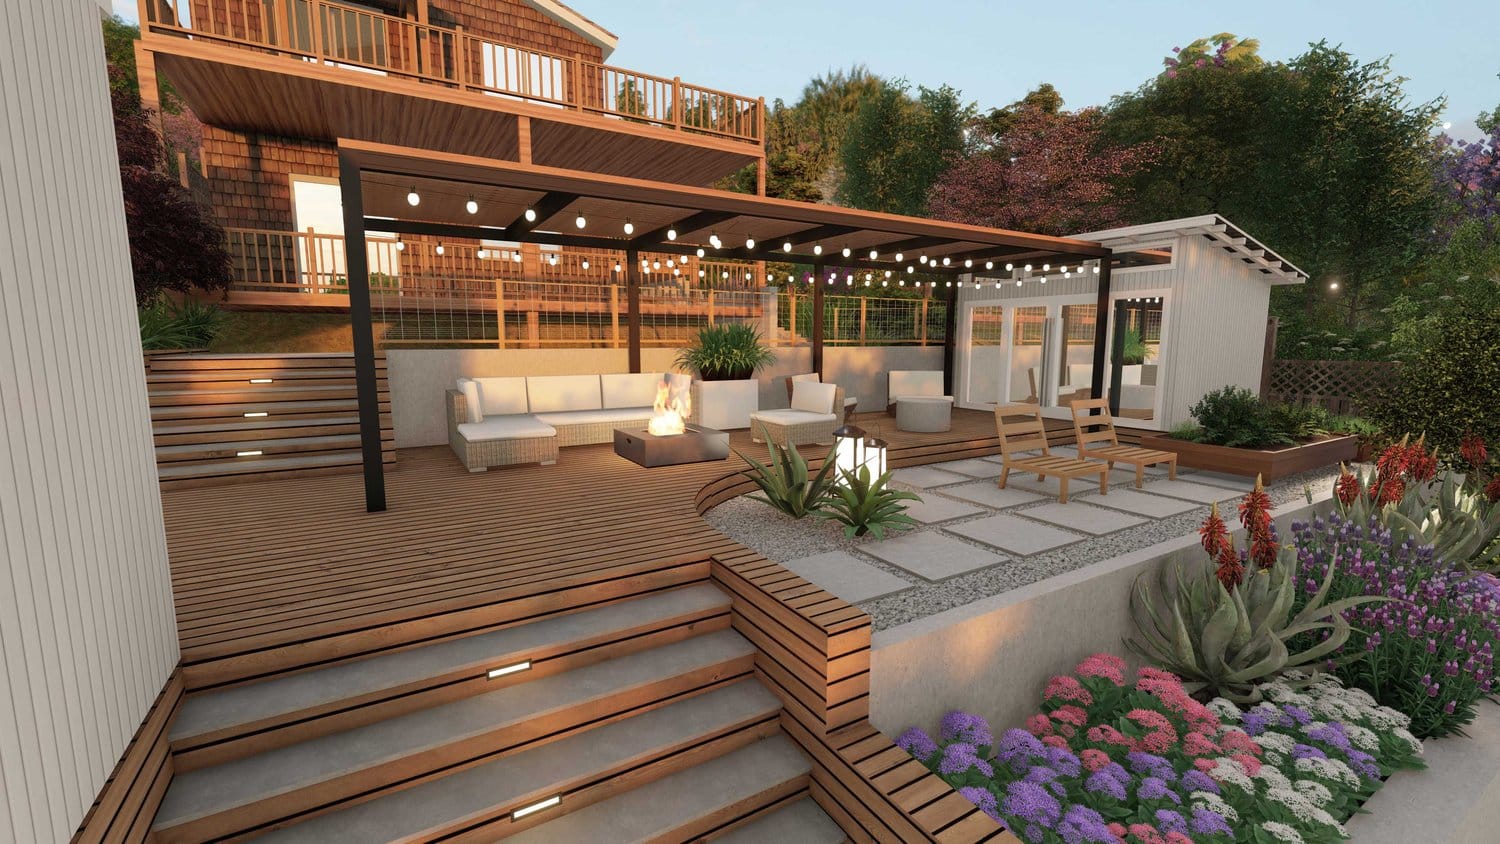 Mill Valley backyard showing deck patio with fire pit seating area, paved seating area and flowers